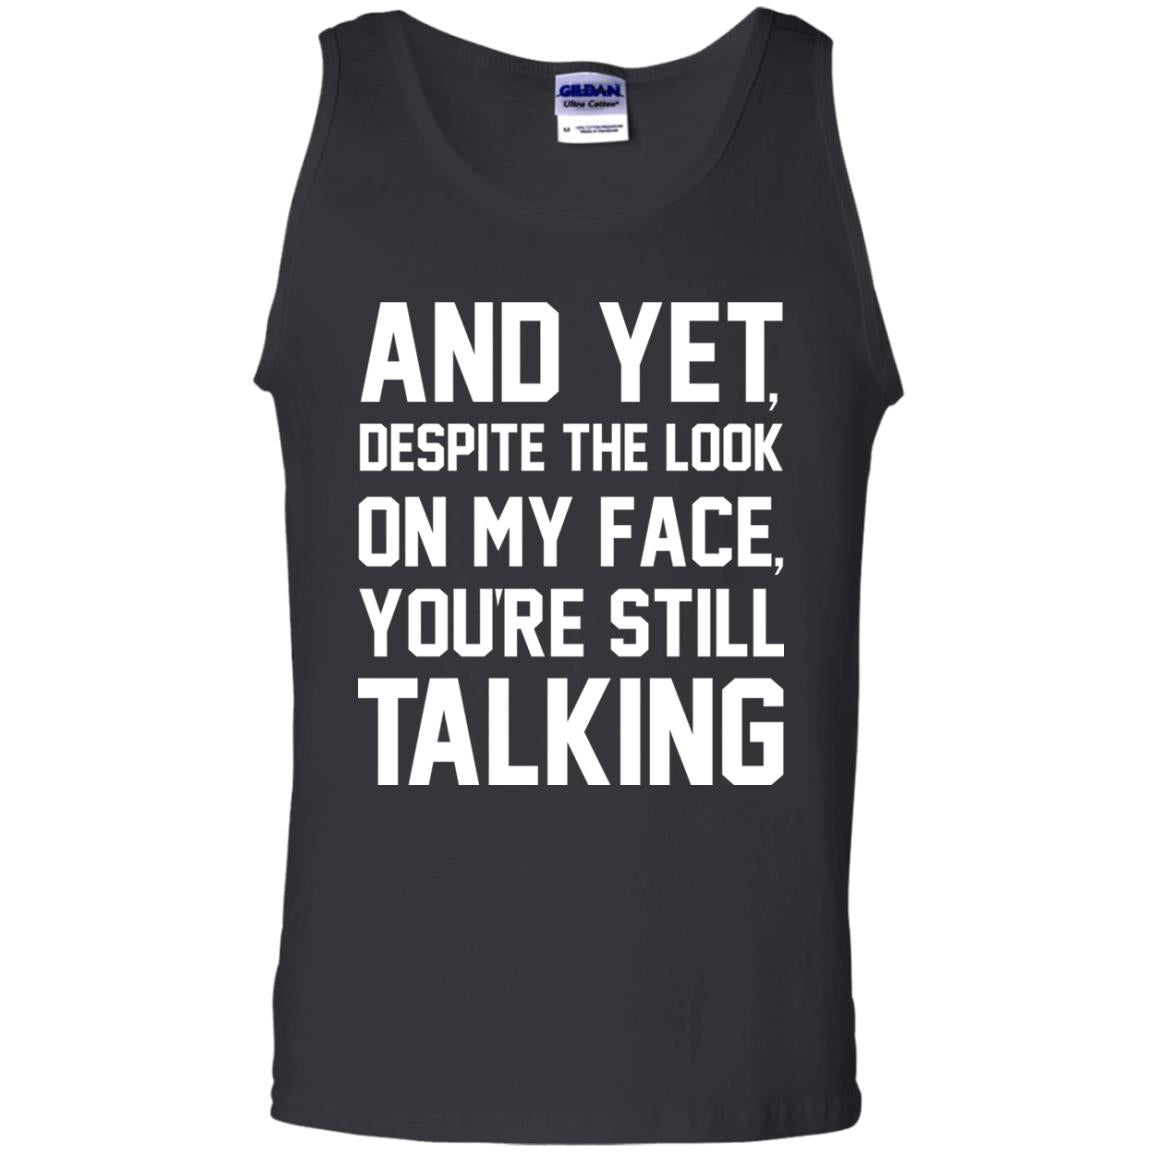 And Yet Despite The Look On My Face You're Still Talking T-shirtG220 Gildan 100% Cotton Tank Top